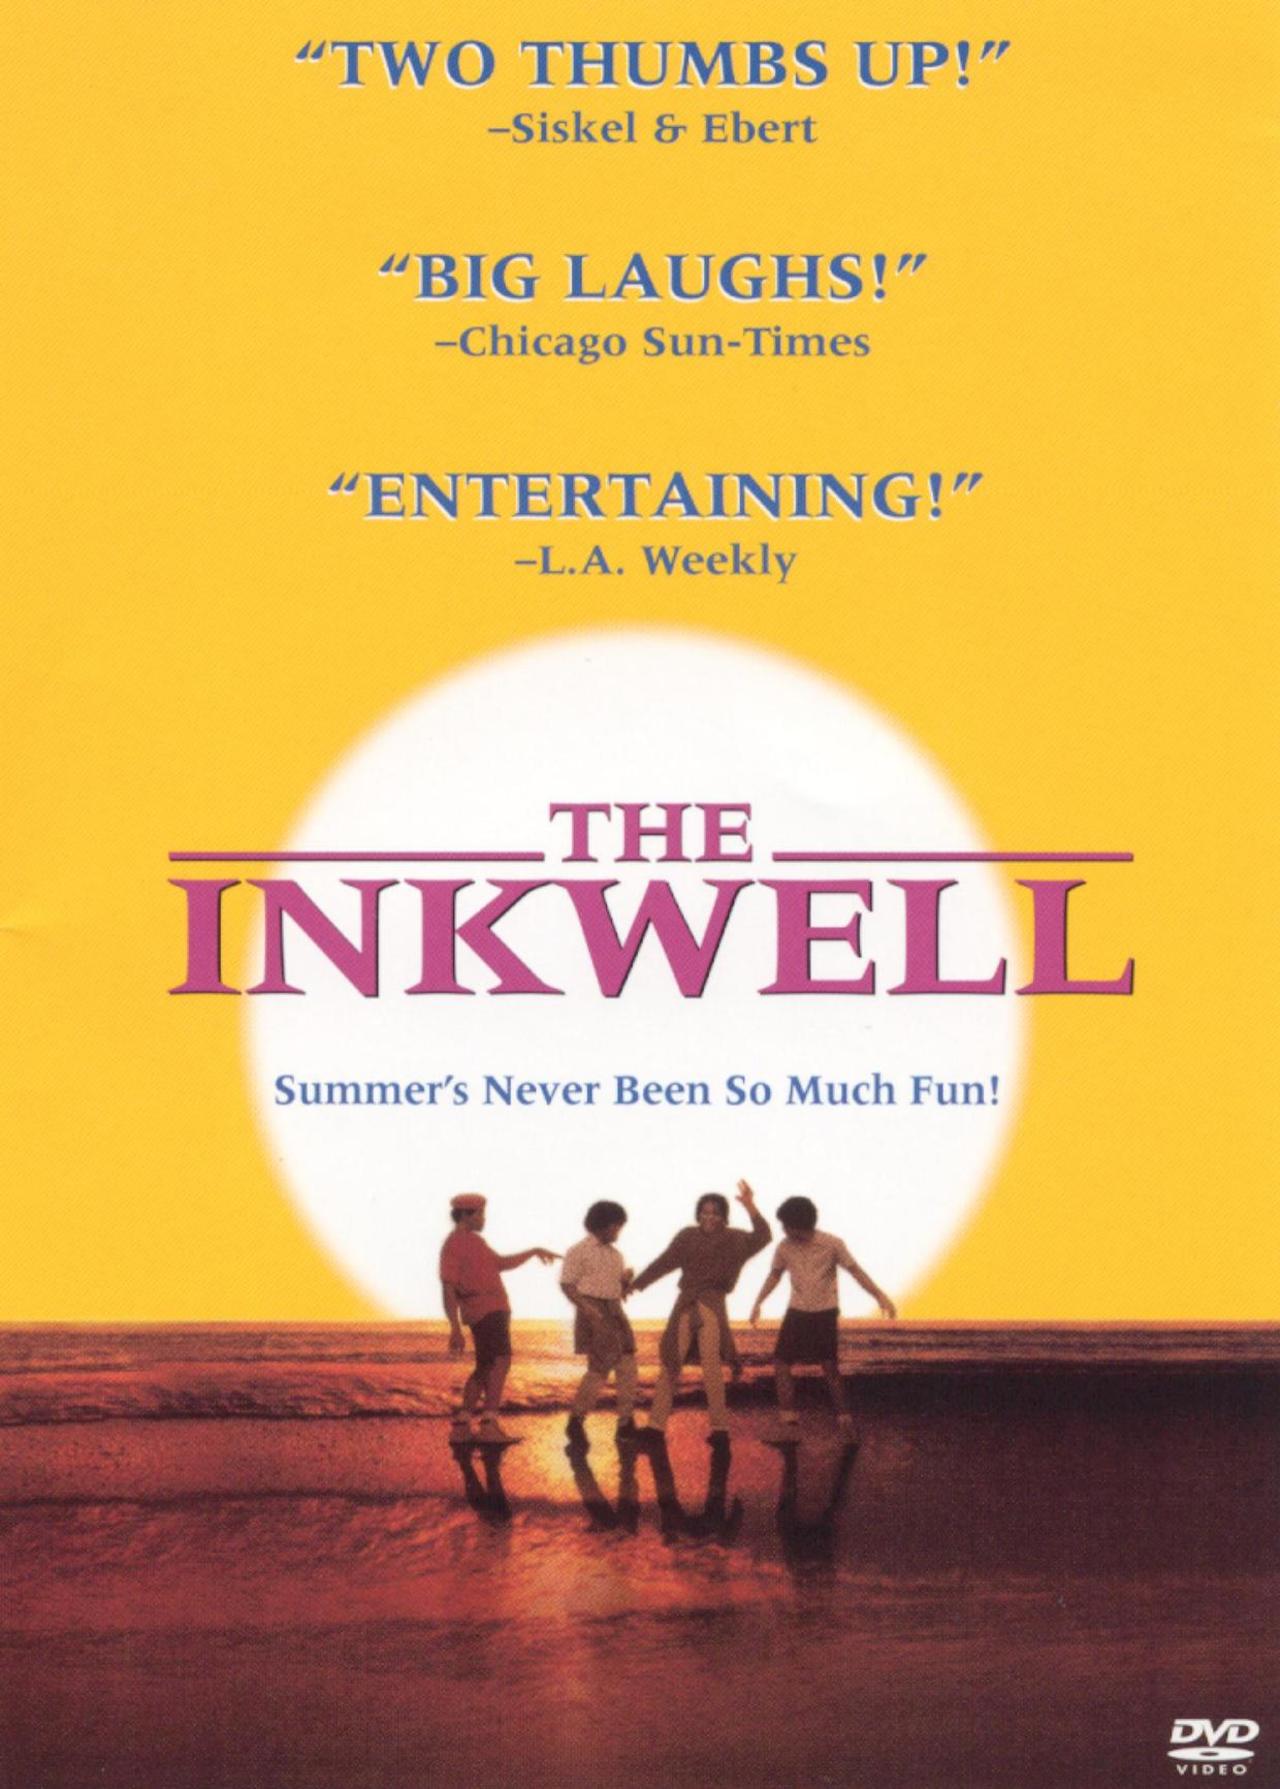 THE INKWELL (1994)